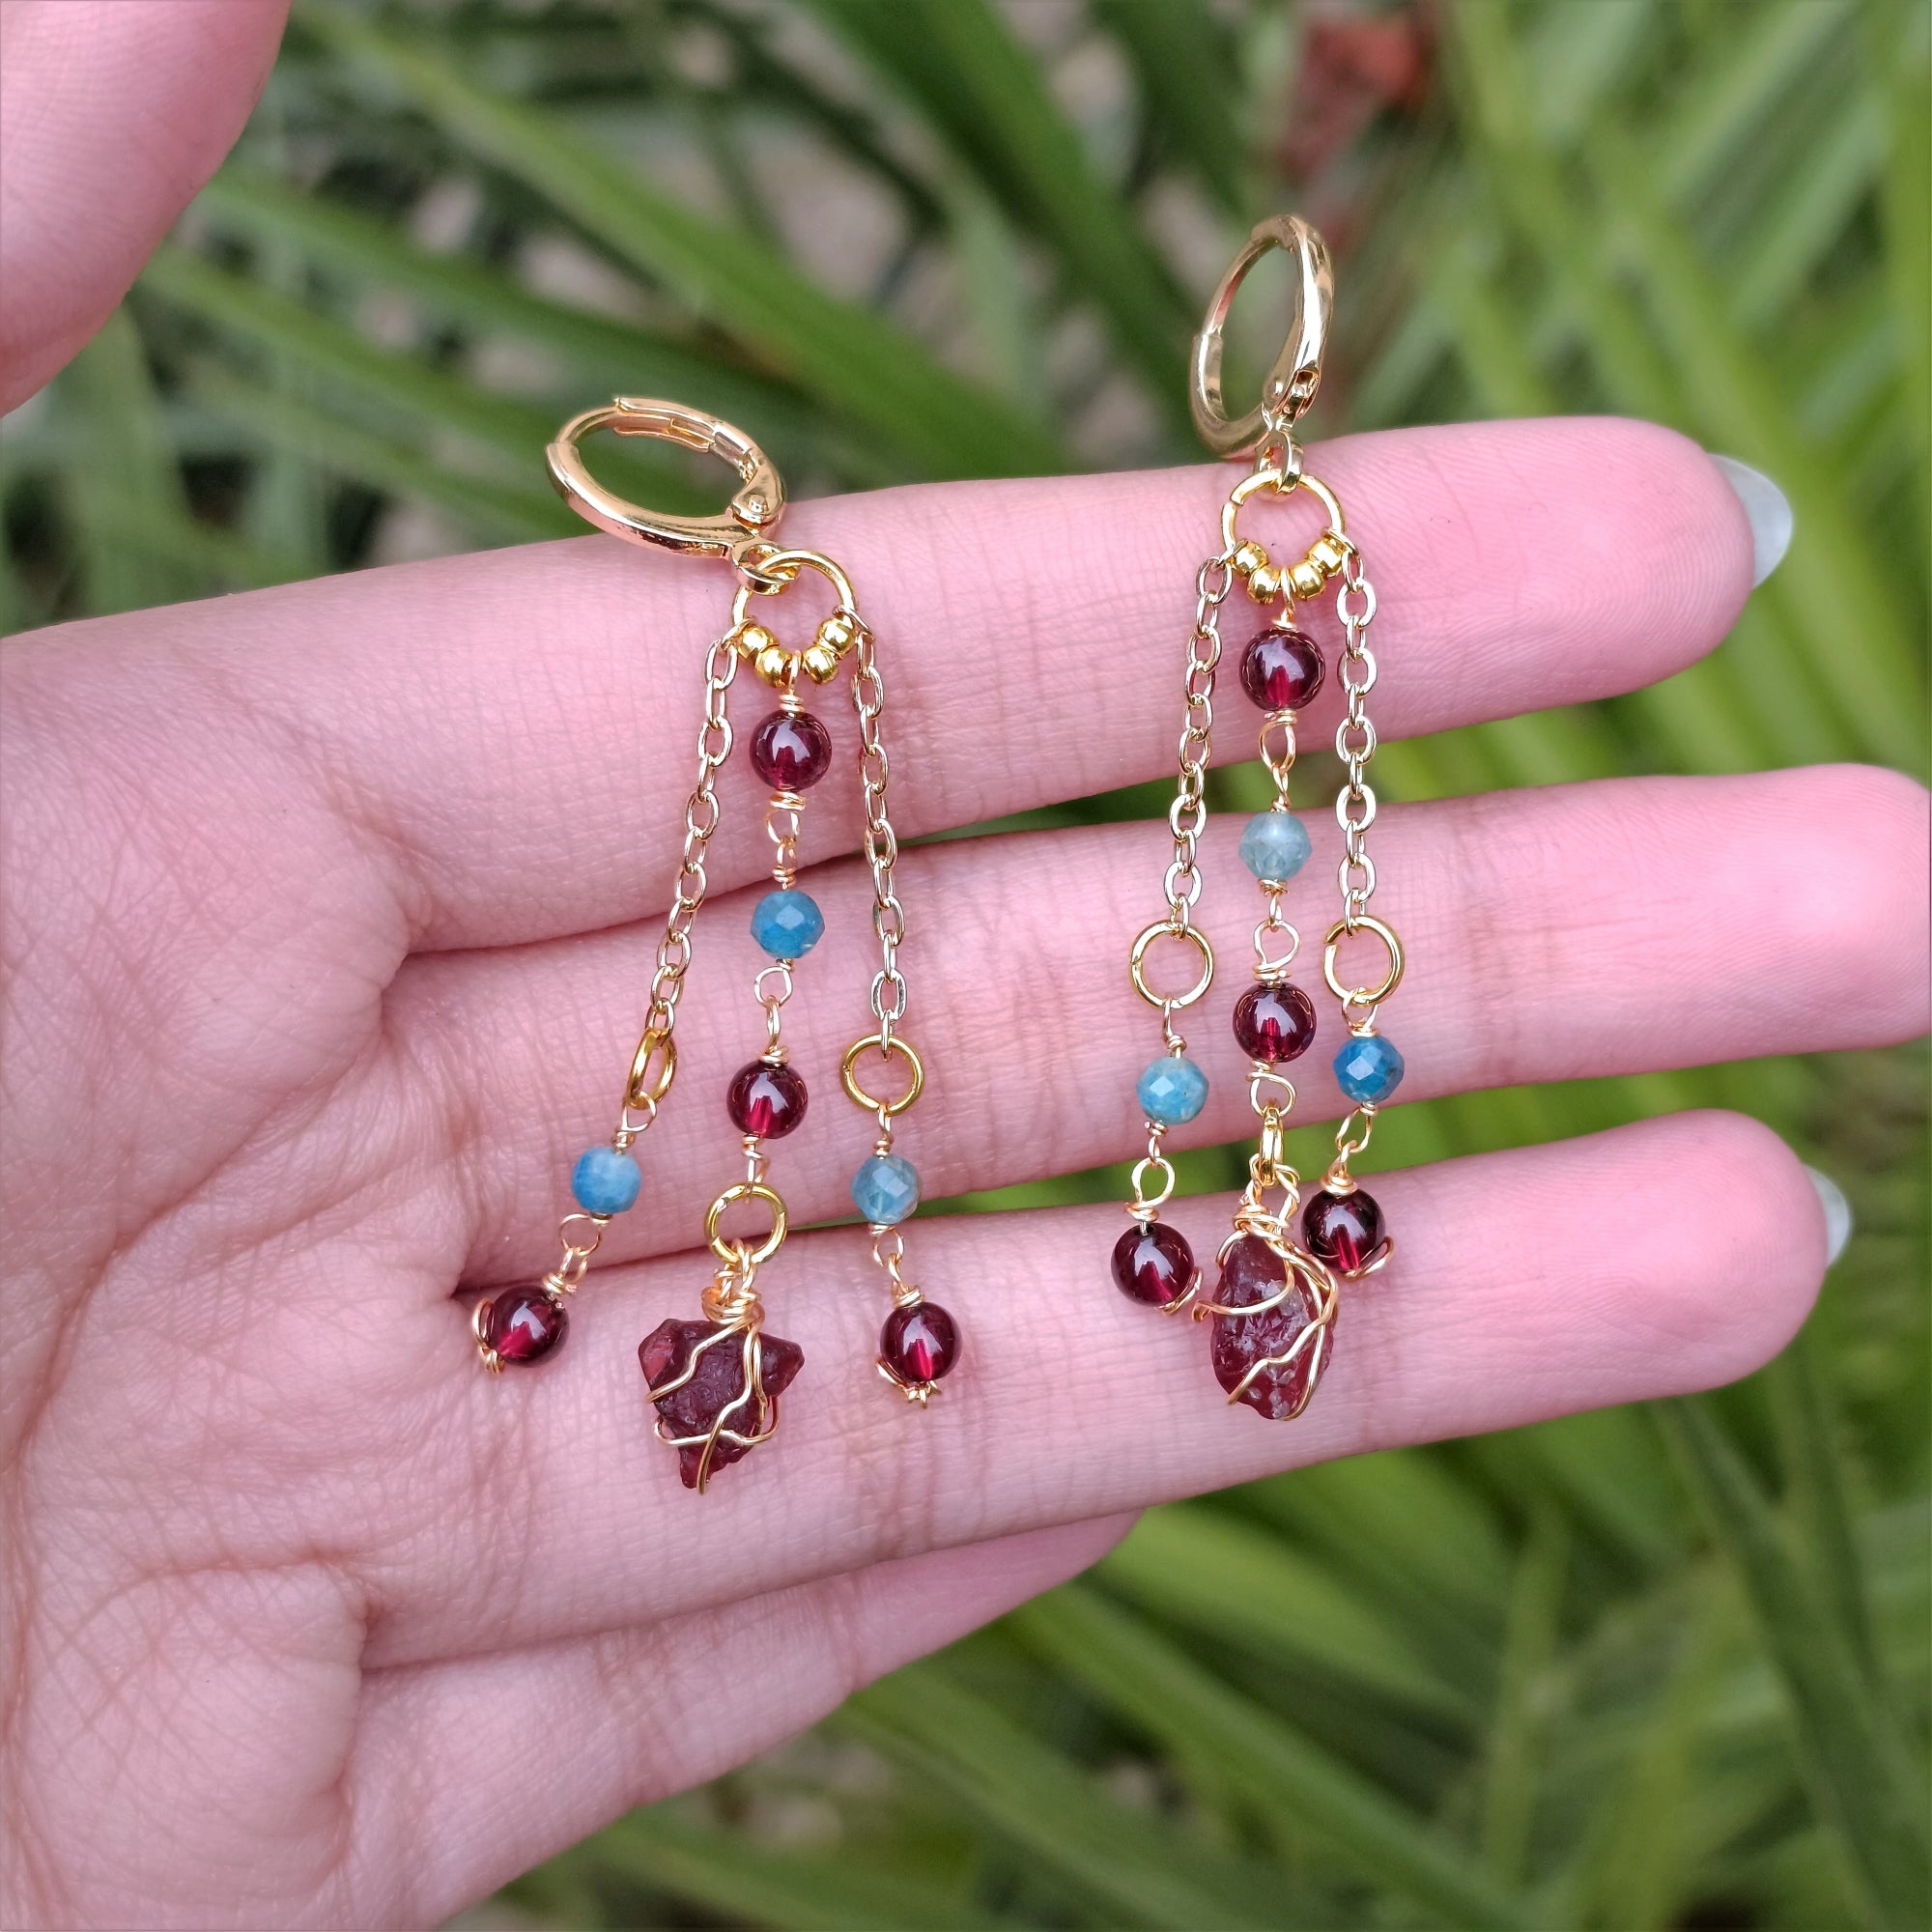 Buy Kaya Trendy Gold Plated Natural Raw Stone Earrings For Women & Girls,  Multicolor Stone Crystal Drop (Green) at Amazon.in